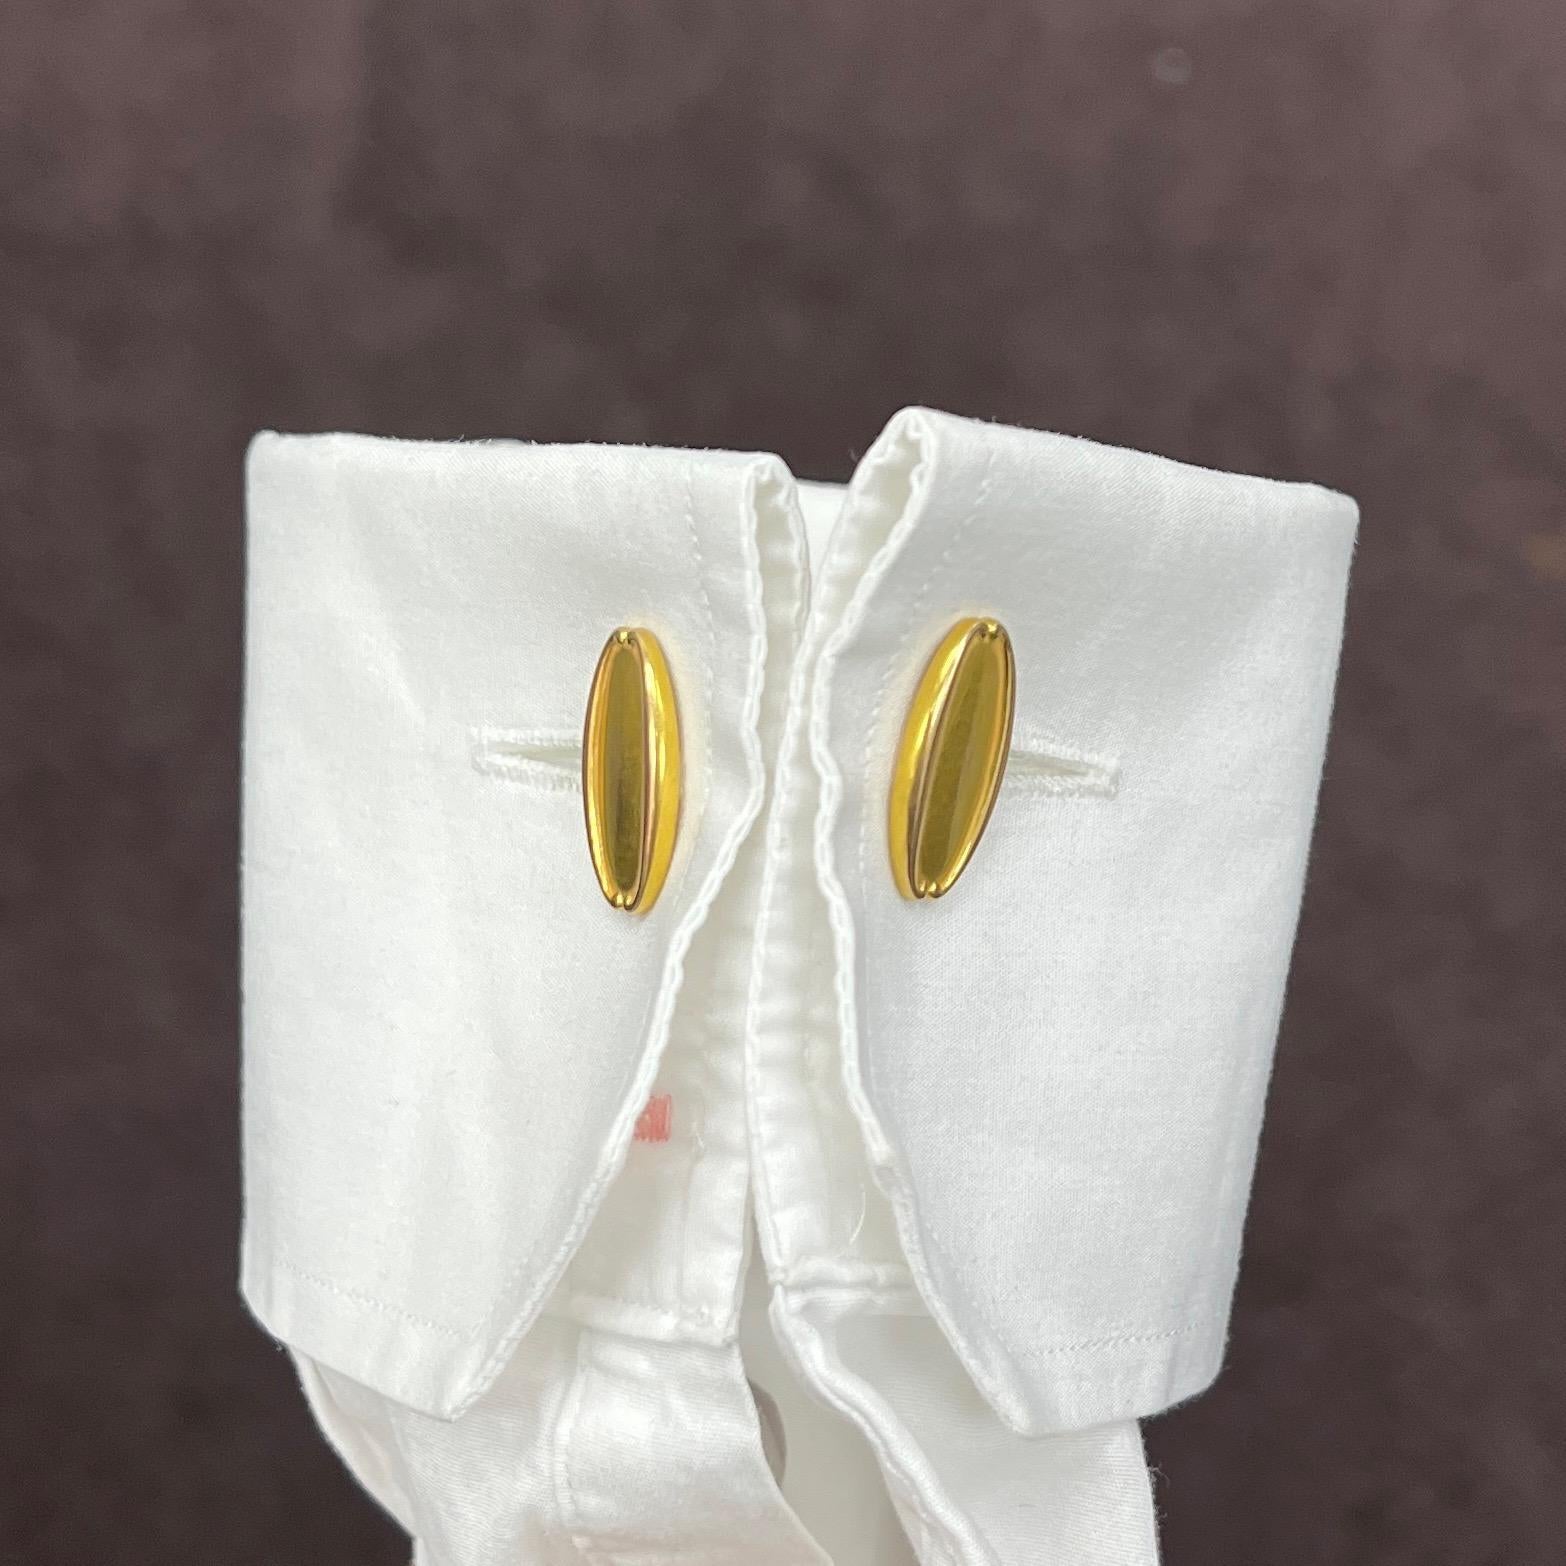 Tiffany & Co. Yellow Gold Cufflinks For Sale 2